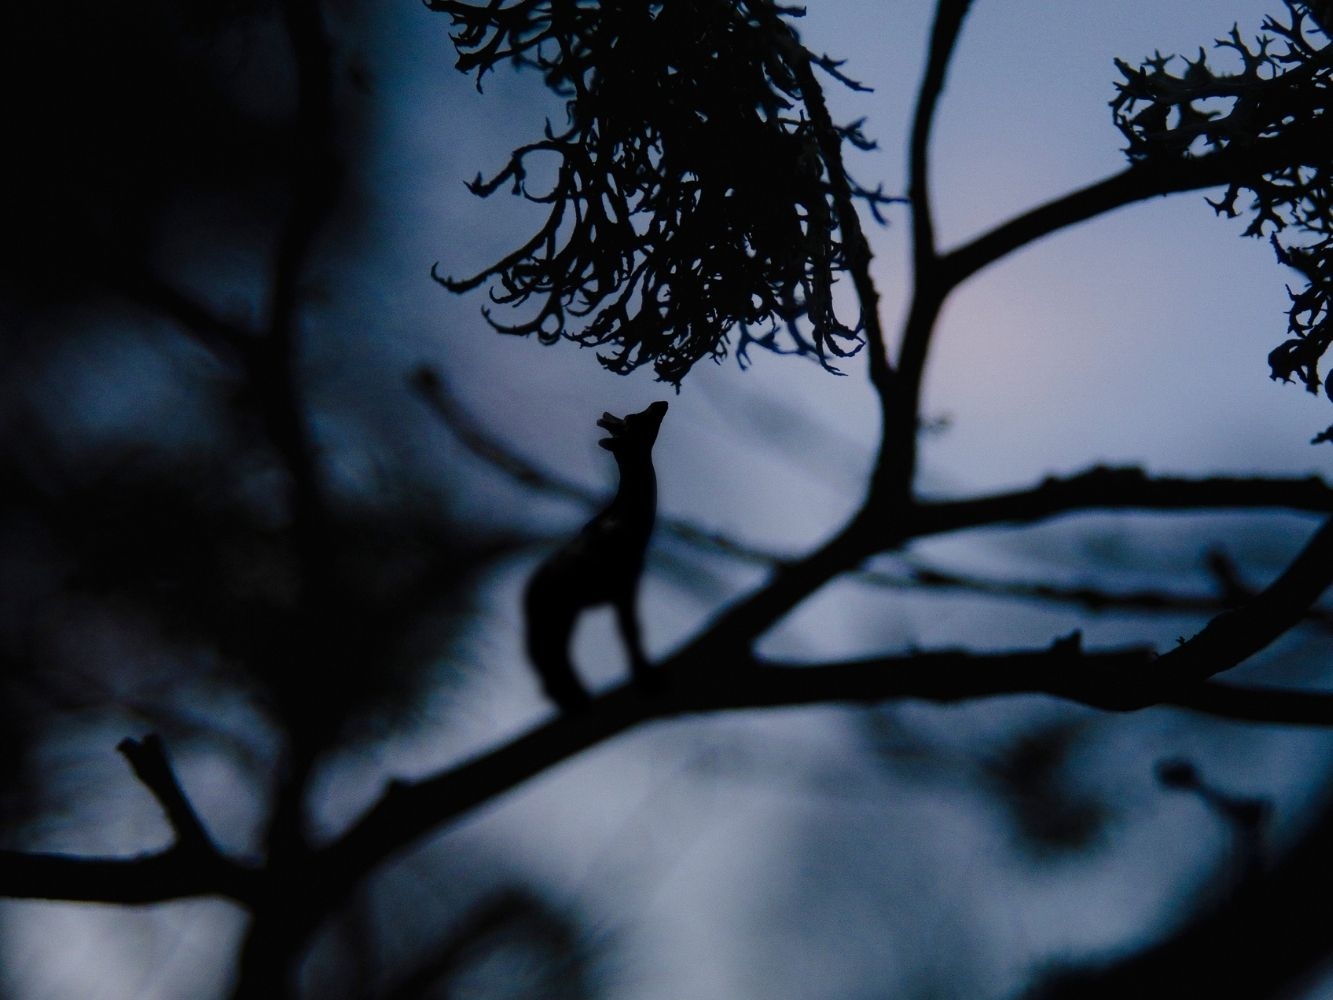 Photography of tree branches at night with a small, shadowed giraffe standing on top of a branch reaching up to leaves 